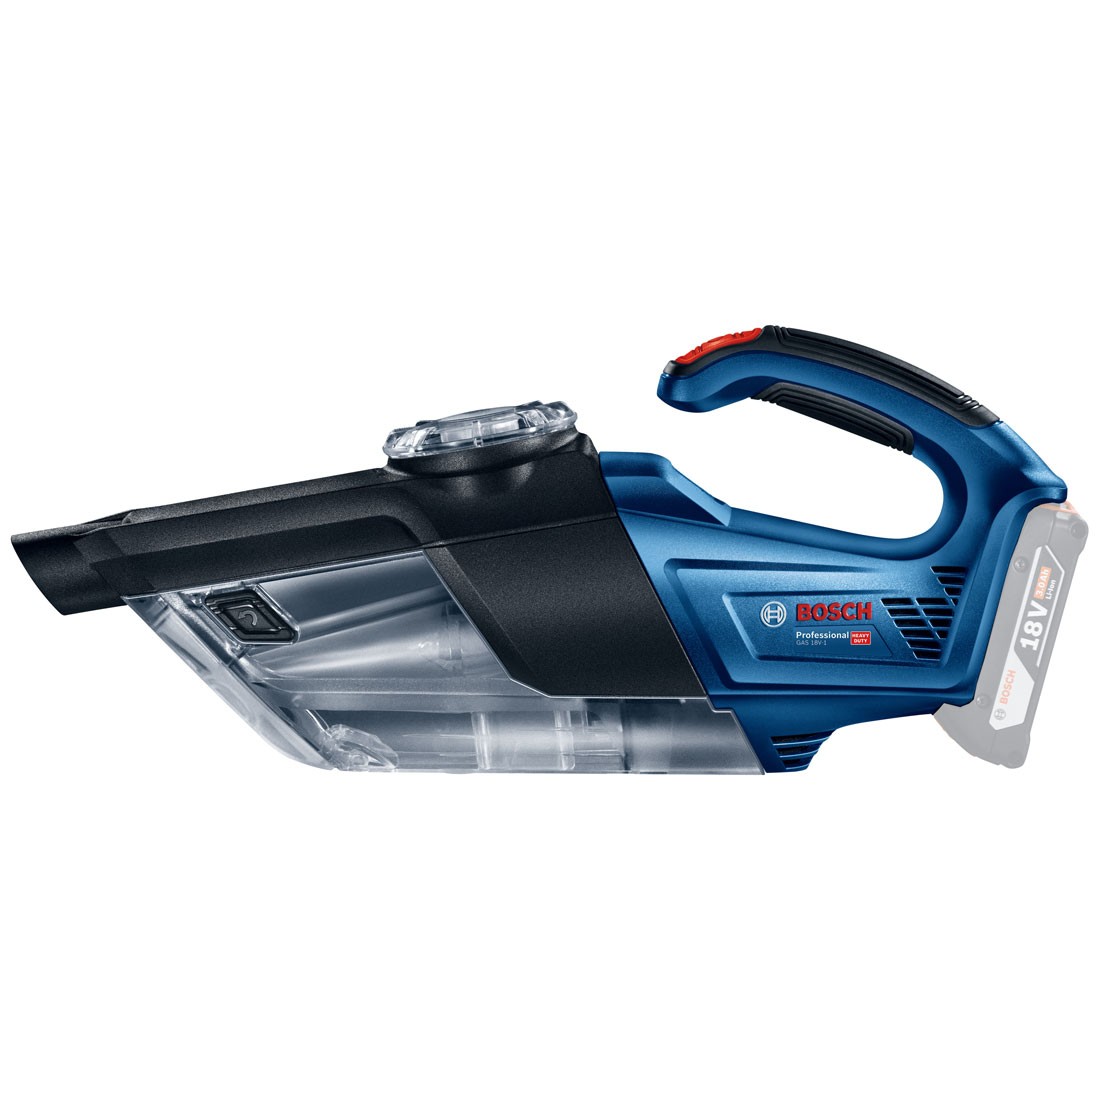 BOSCH GAS18V-1 CORDLESS VACUUM CLEANER (SOLO) - Click Image to Close